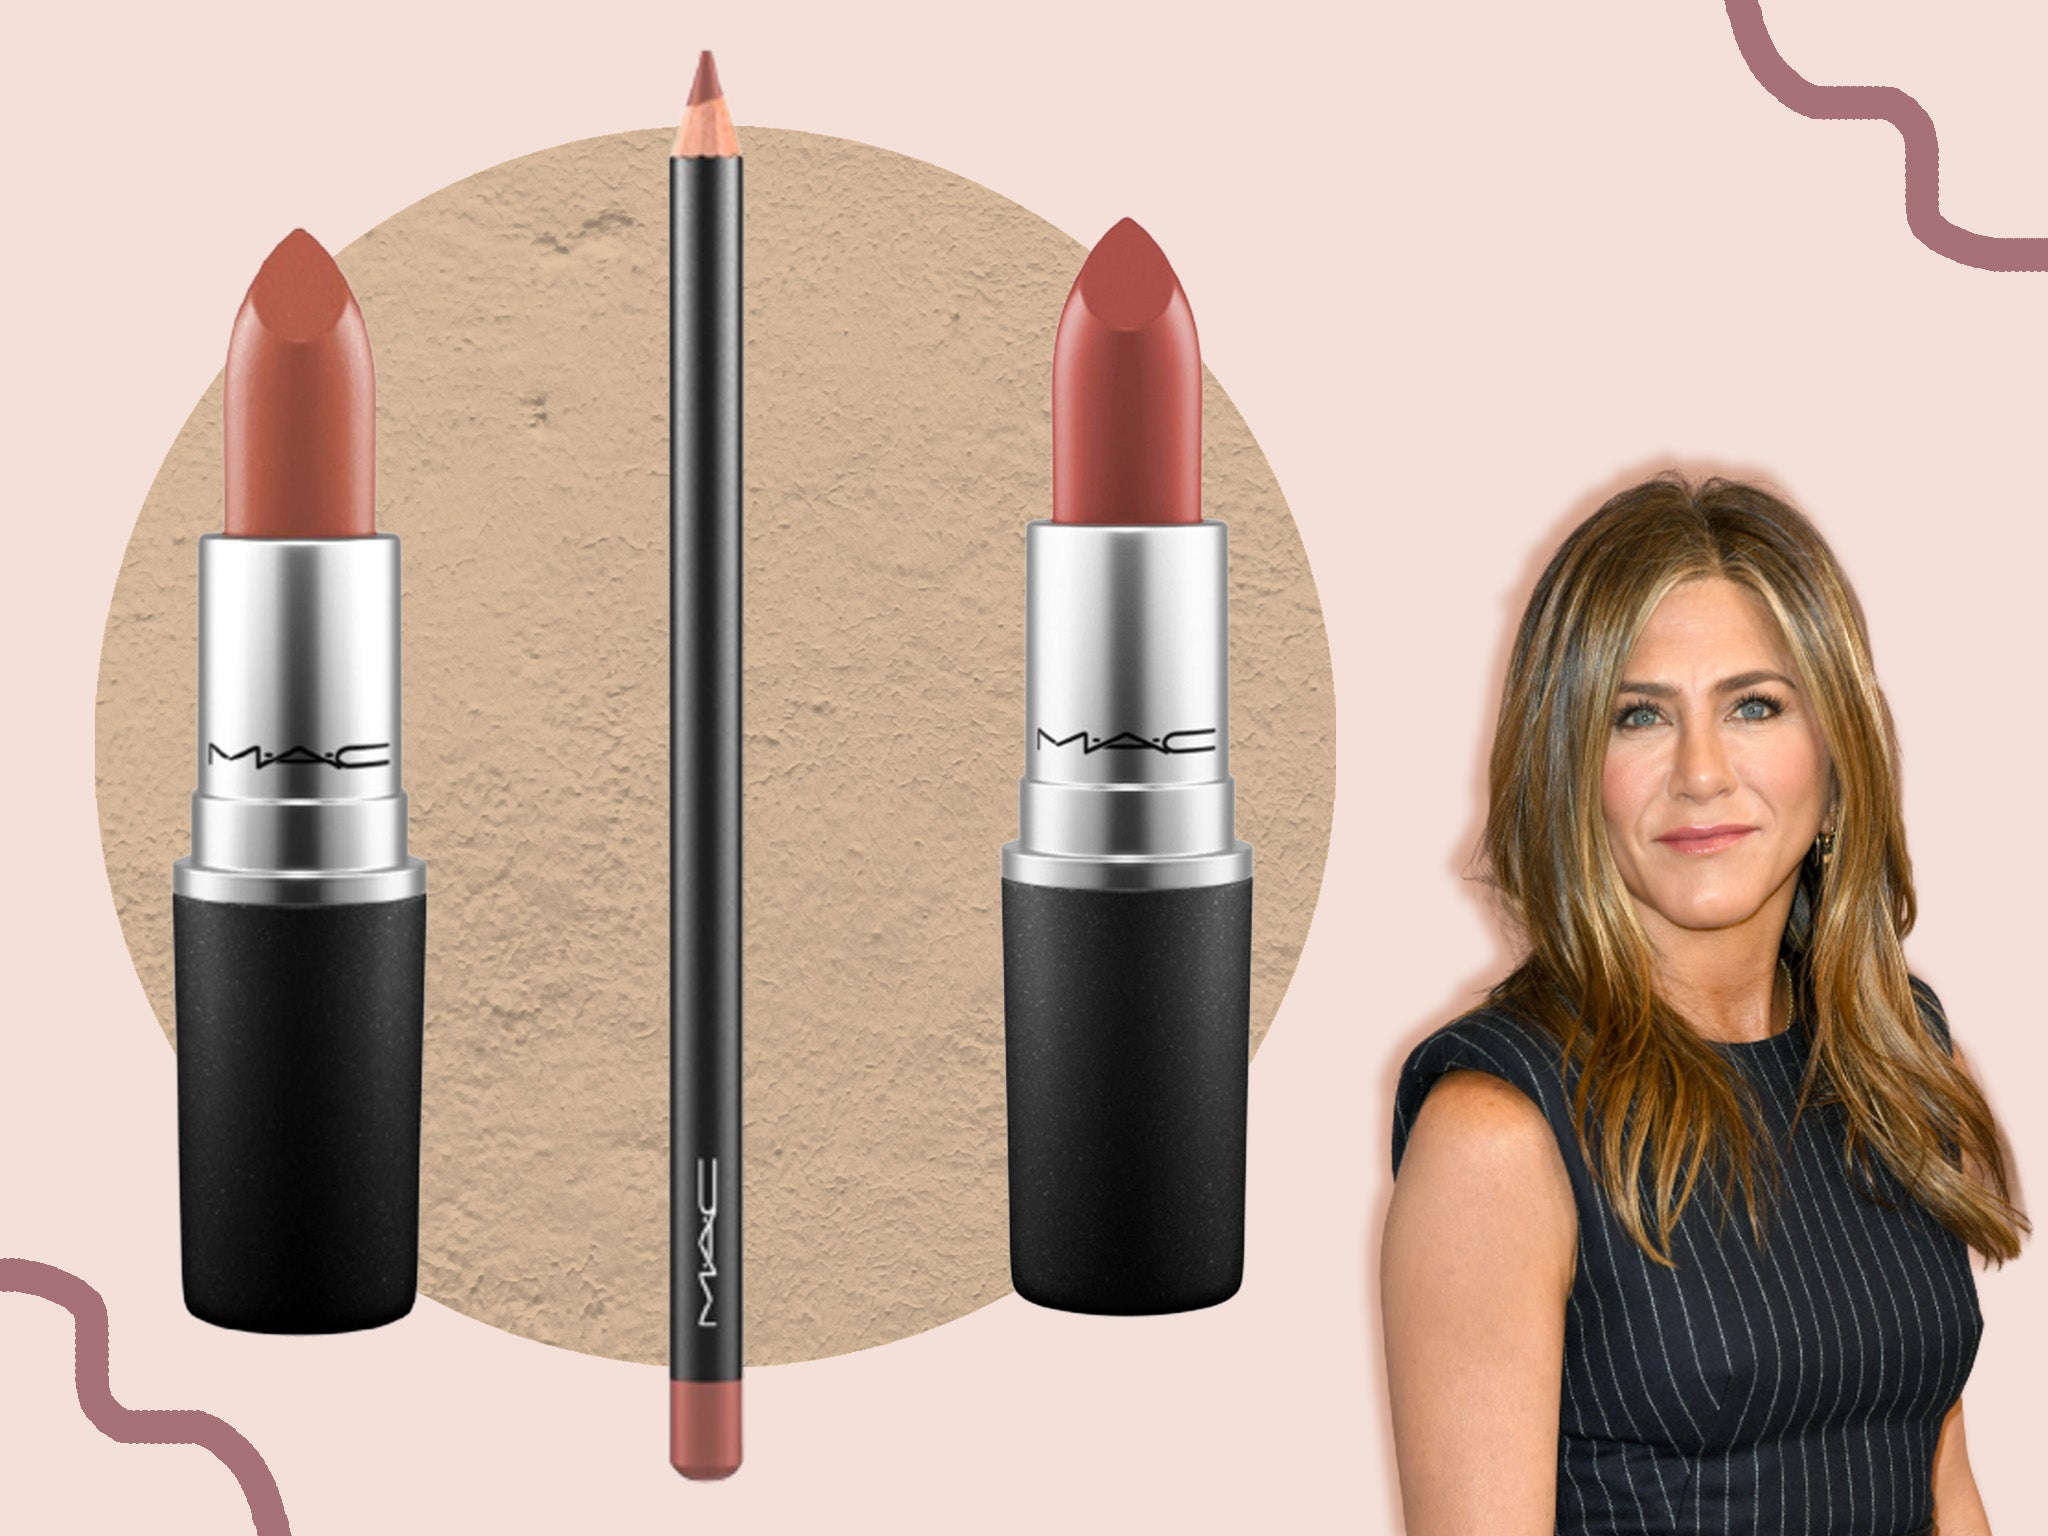 Nineties-style make-up was a staple for Jennifer Aniston’s character in the sitcom